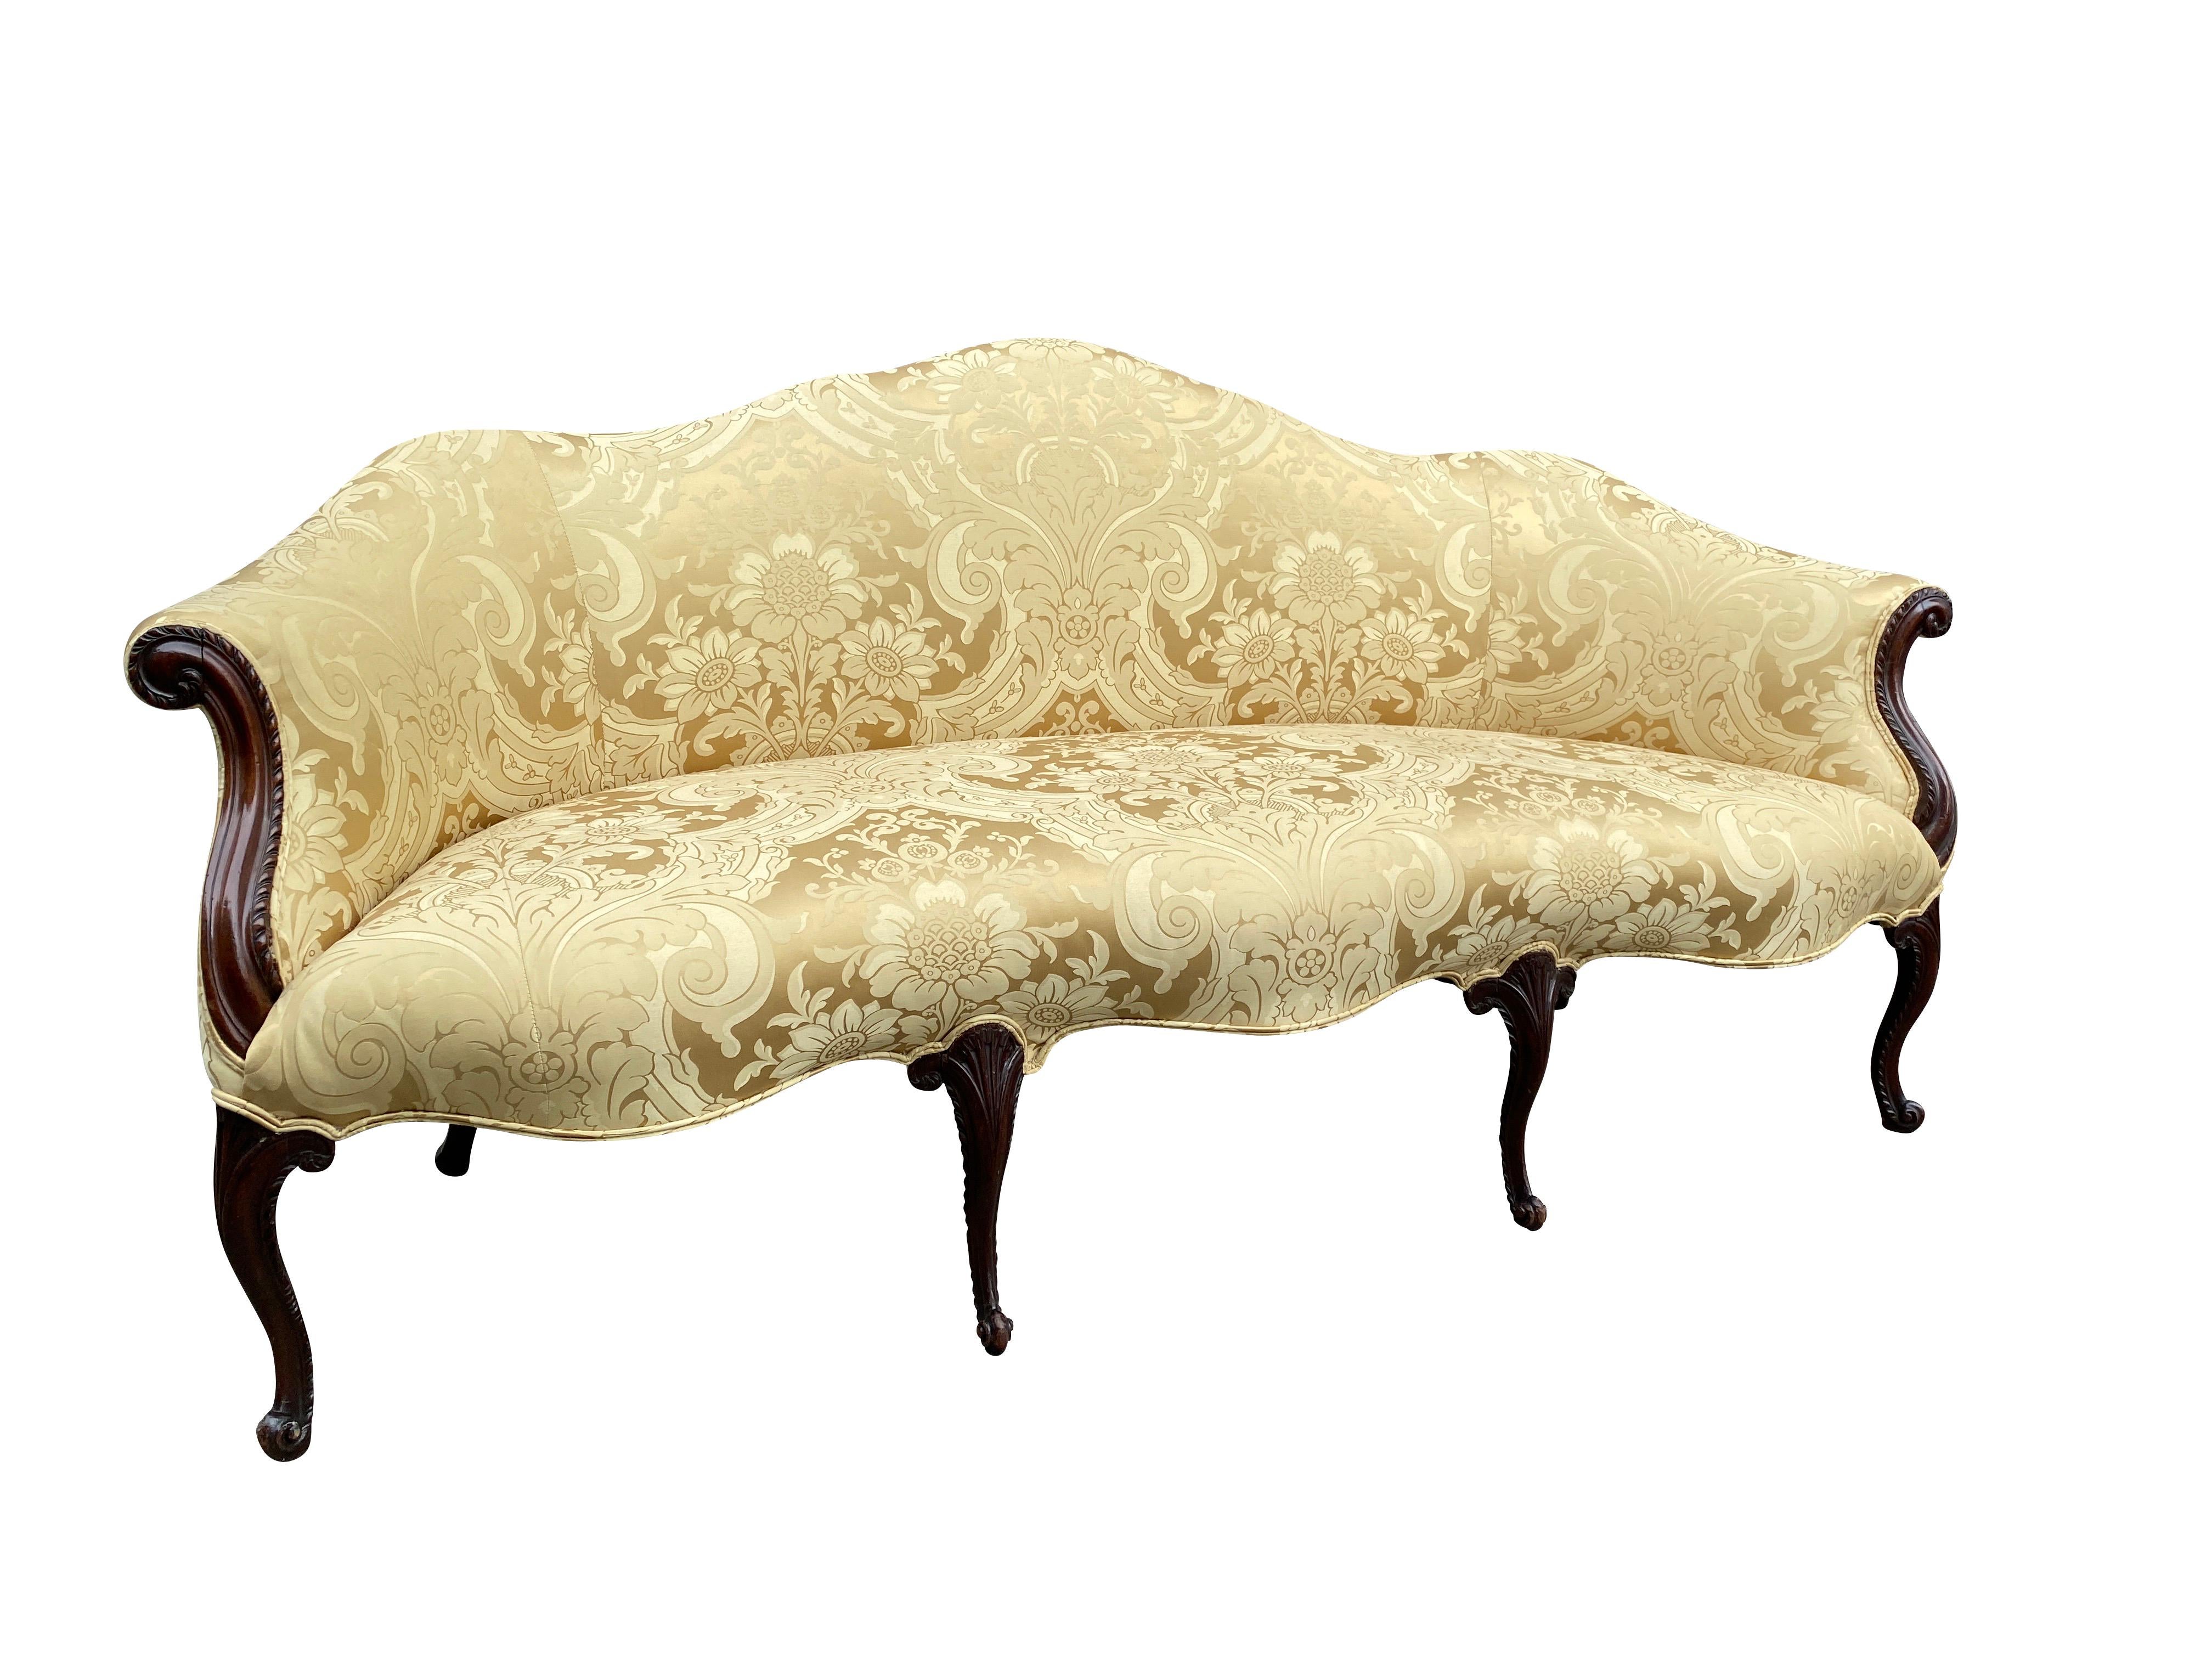 Serpentine upholstered back and seat done in yellow damask, scrolled arms and raised on carved cabriole legs in the French taste.